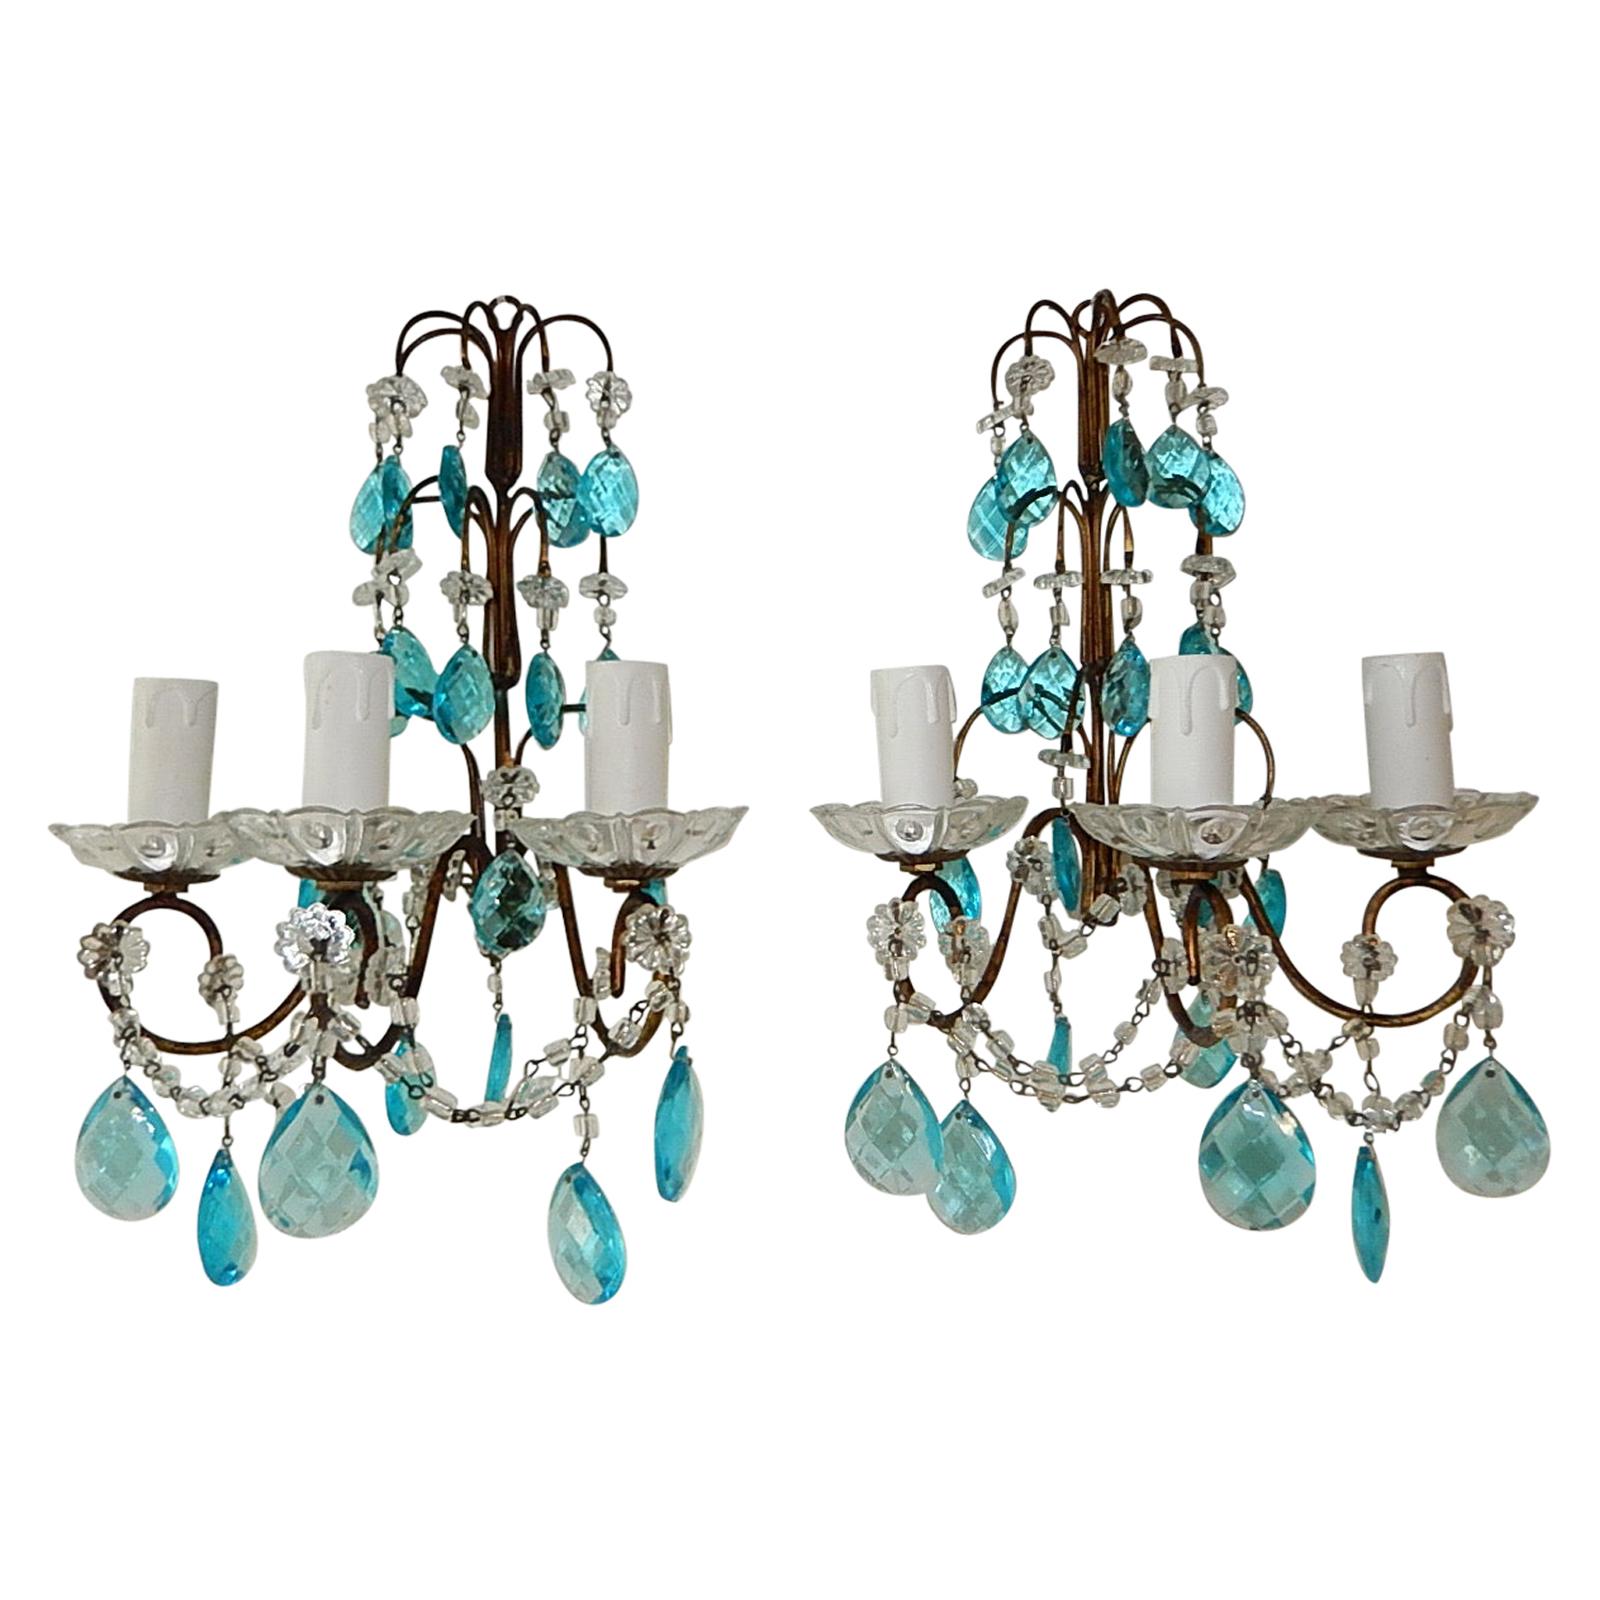 1920 French Aqua Blue Crystal Prisms and Swags Sconces For Sale